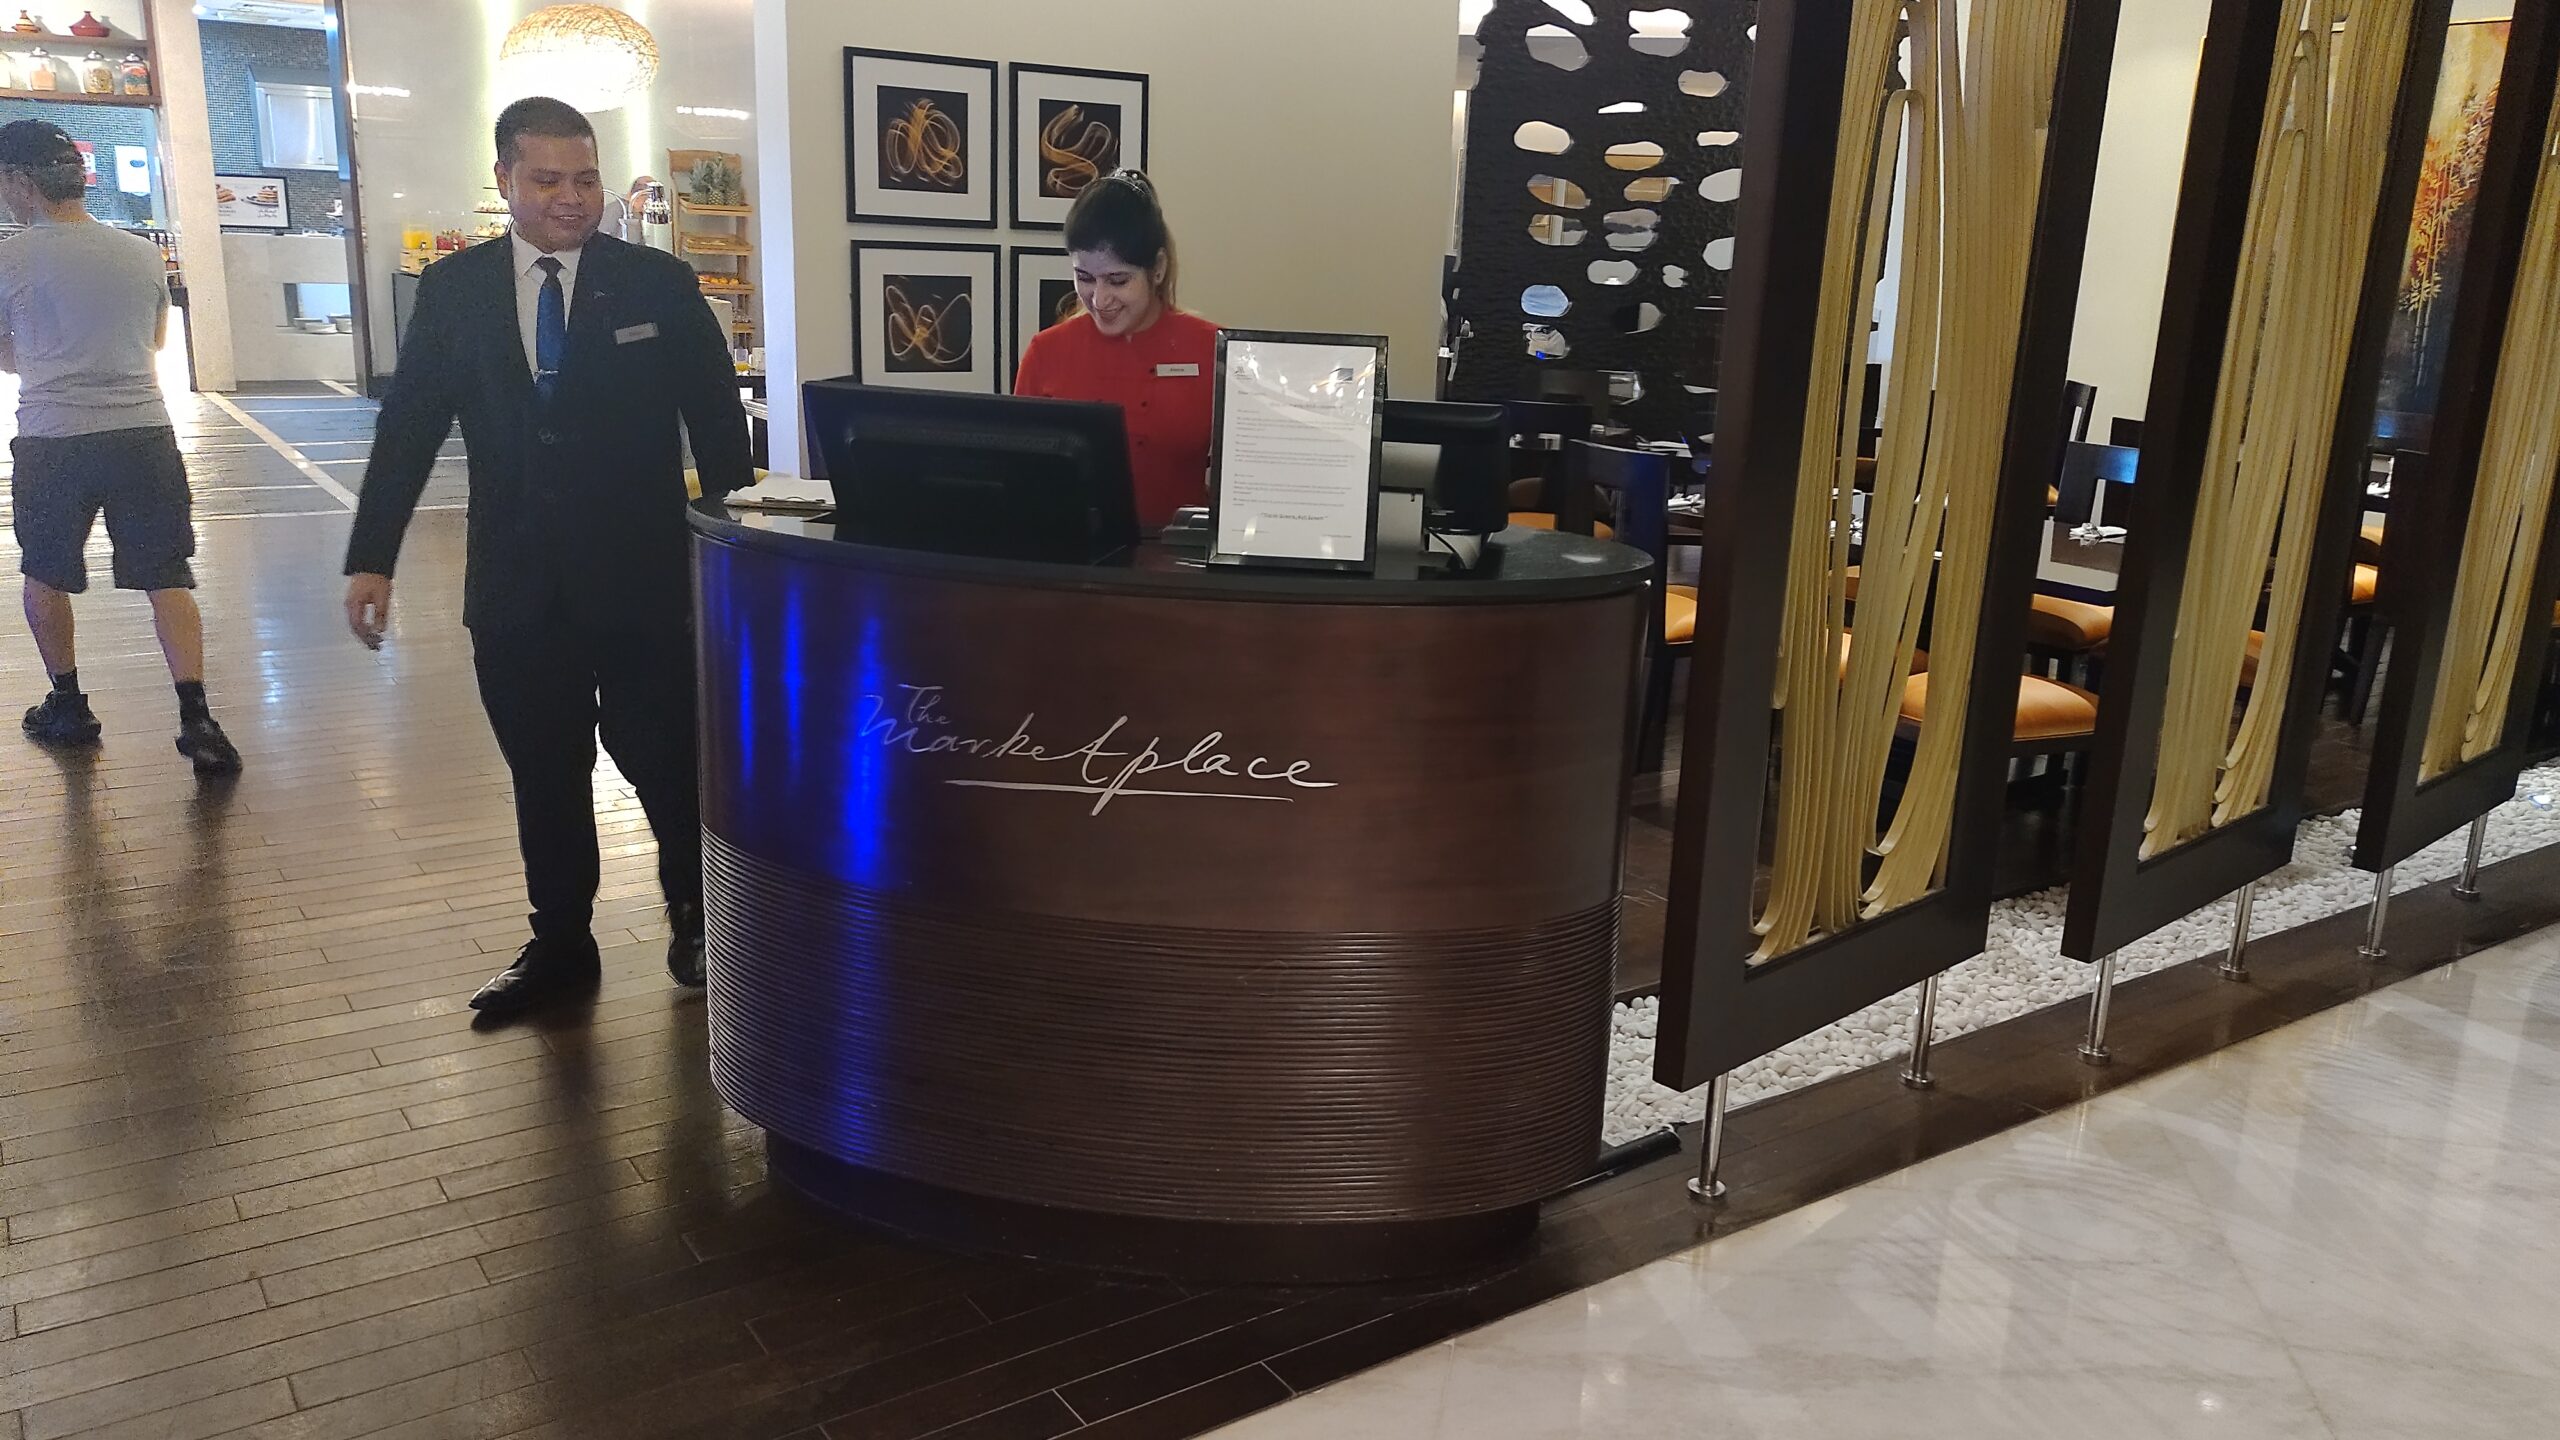 PICTURE OF THE ENTRANCE TO THE MARKETPLACE RESTAURANT AT THE LOBBY LEVEL.